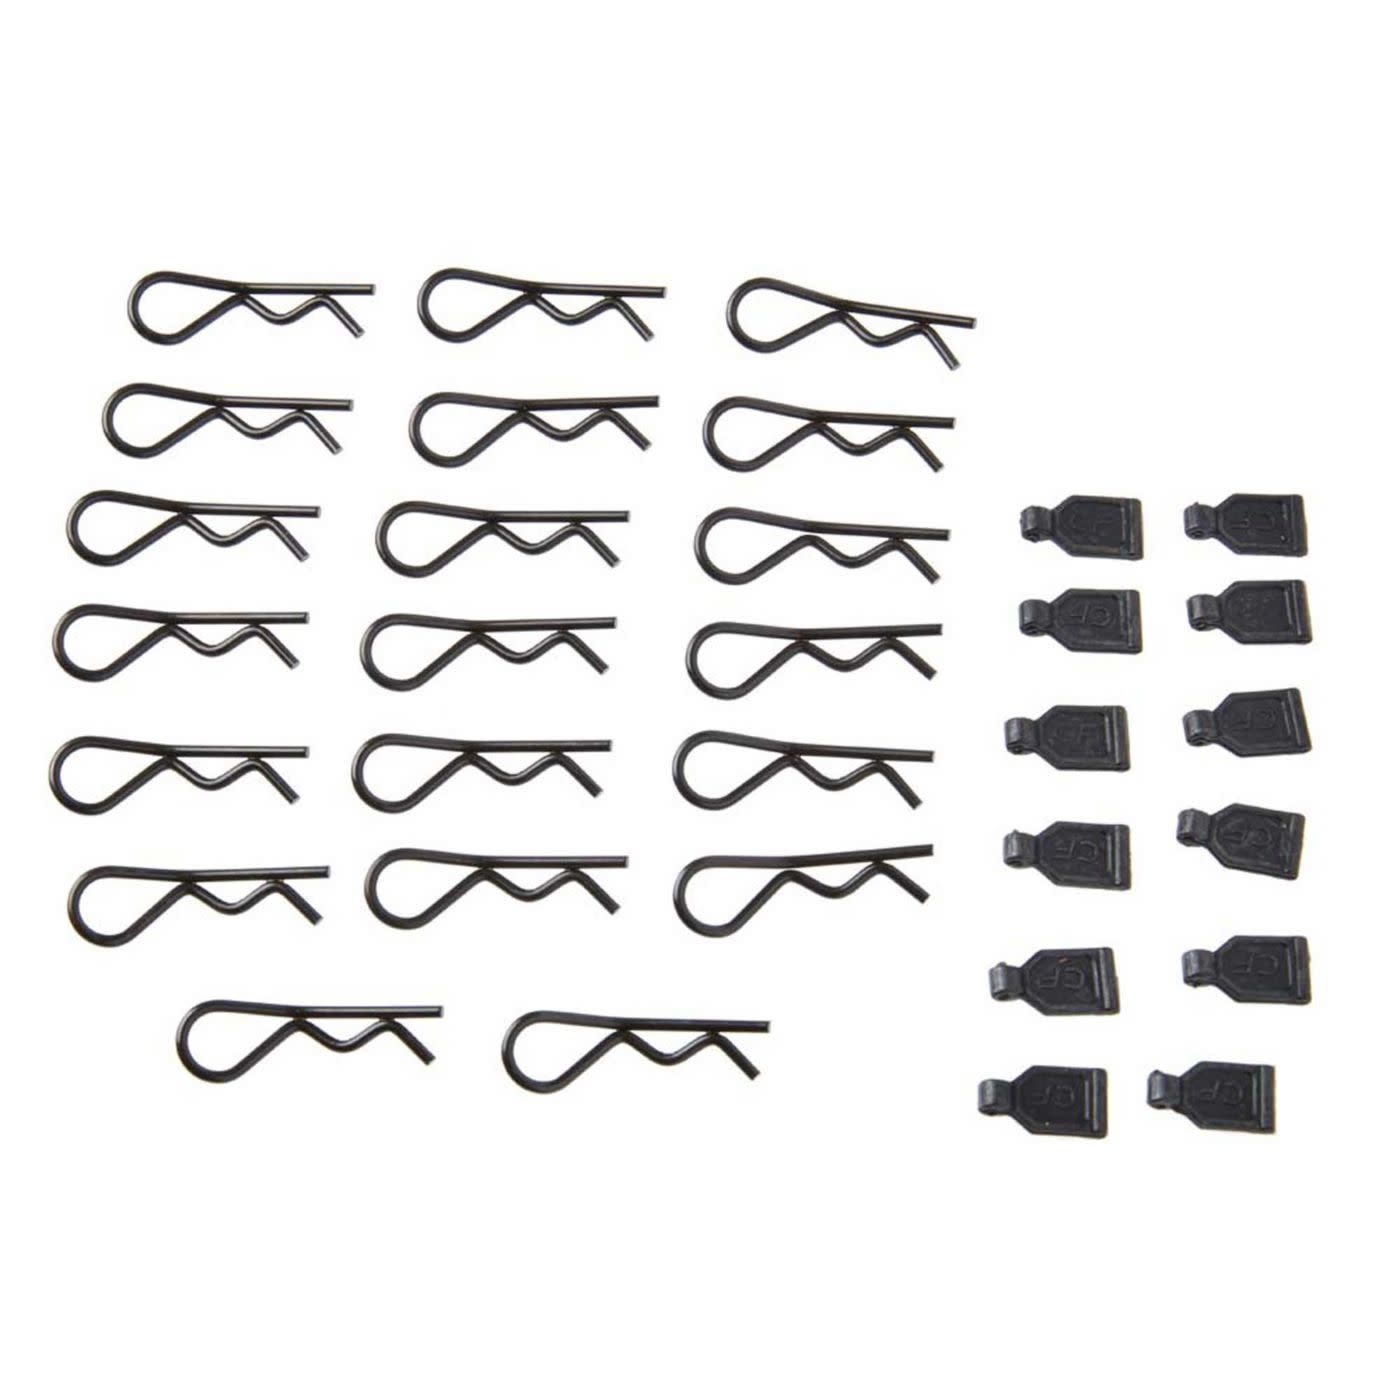 Duratrax 1/8 Body Clips (20)/Rubber Pull Tabs (12)